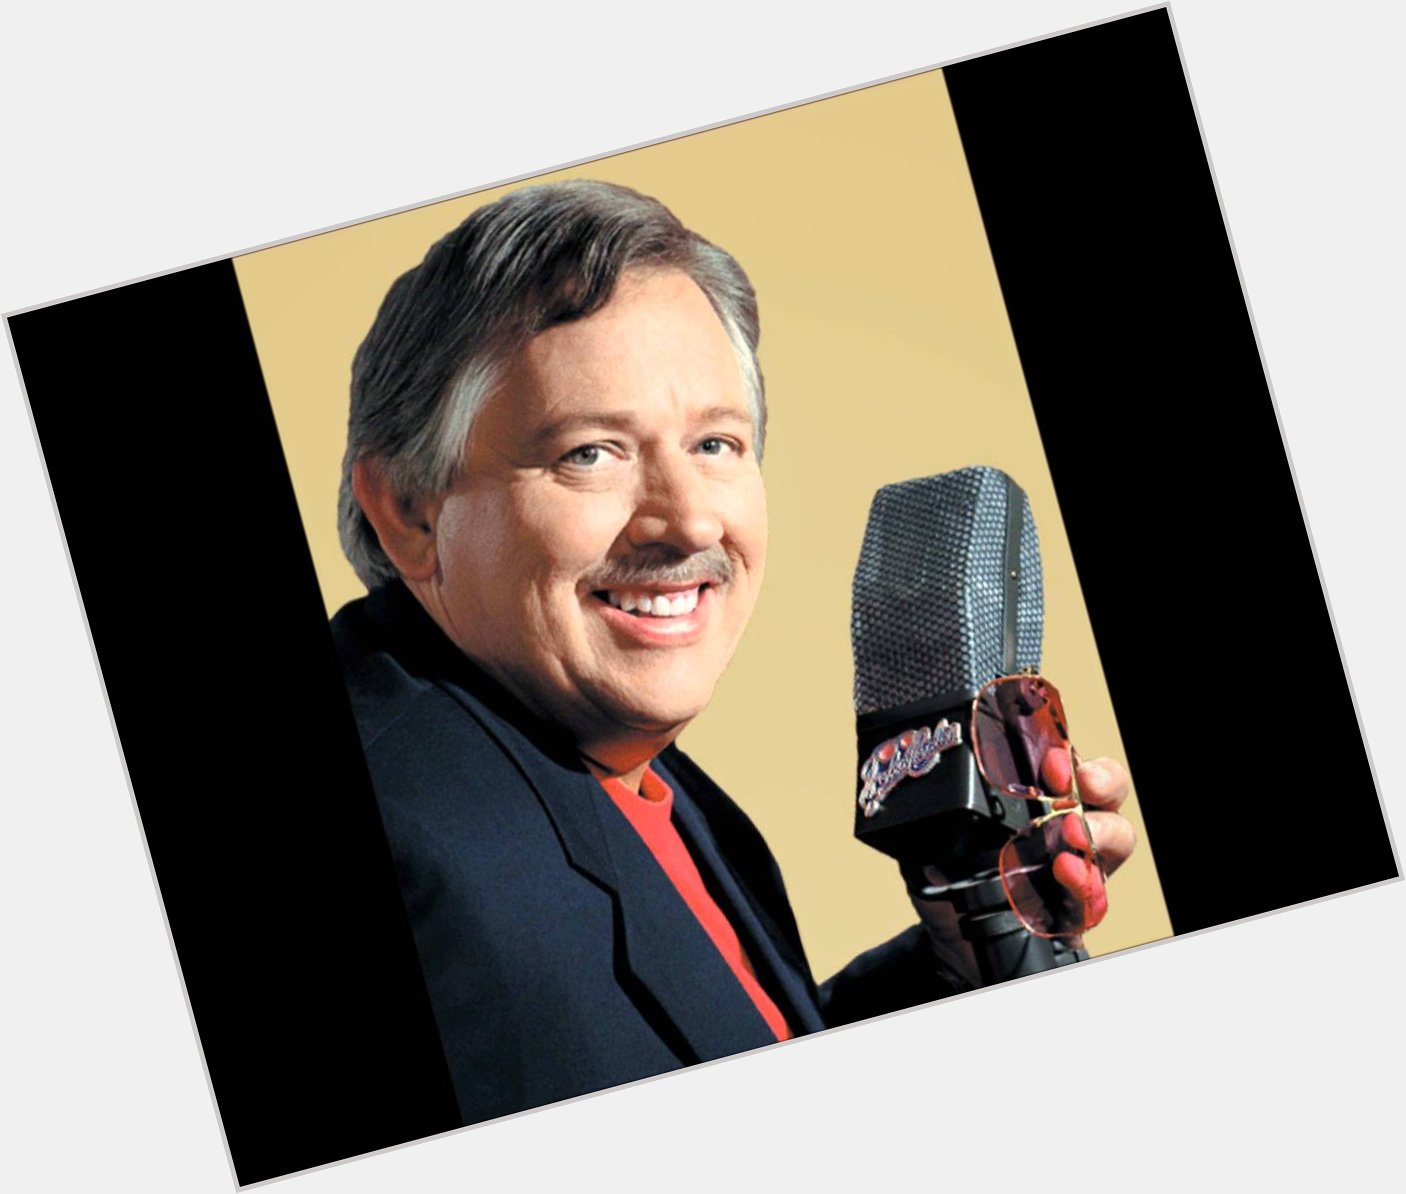 August 11 Birthdays....
Happy Birthday to 71 year old John Conlee and 43 year old songwriter, Rachel Proctor! 